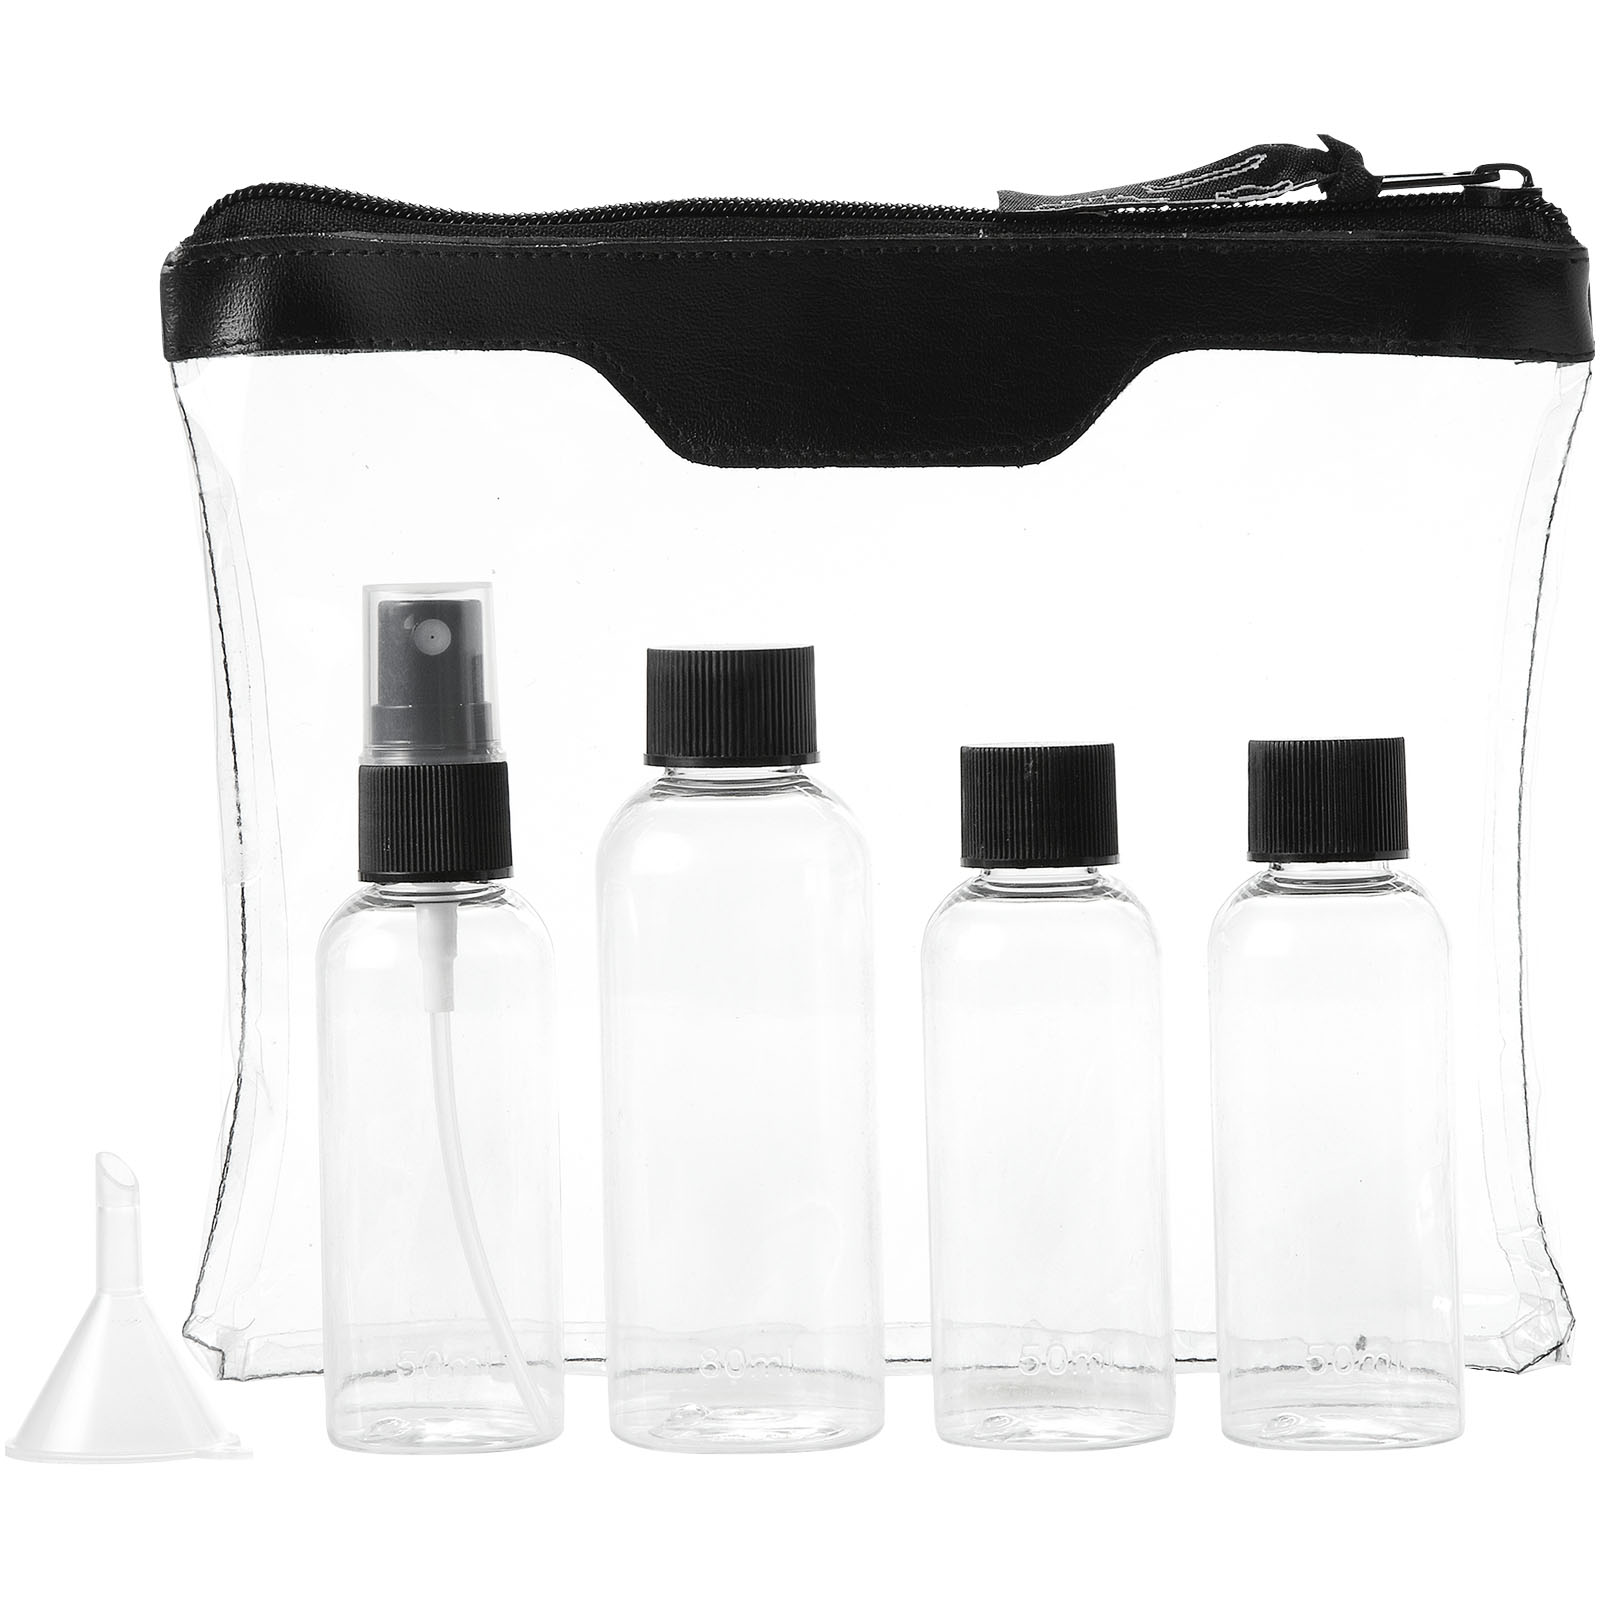 Advertising Travel Accessories - Munich airline approved travel bottle set - 4